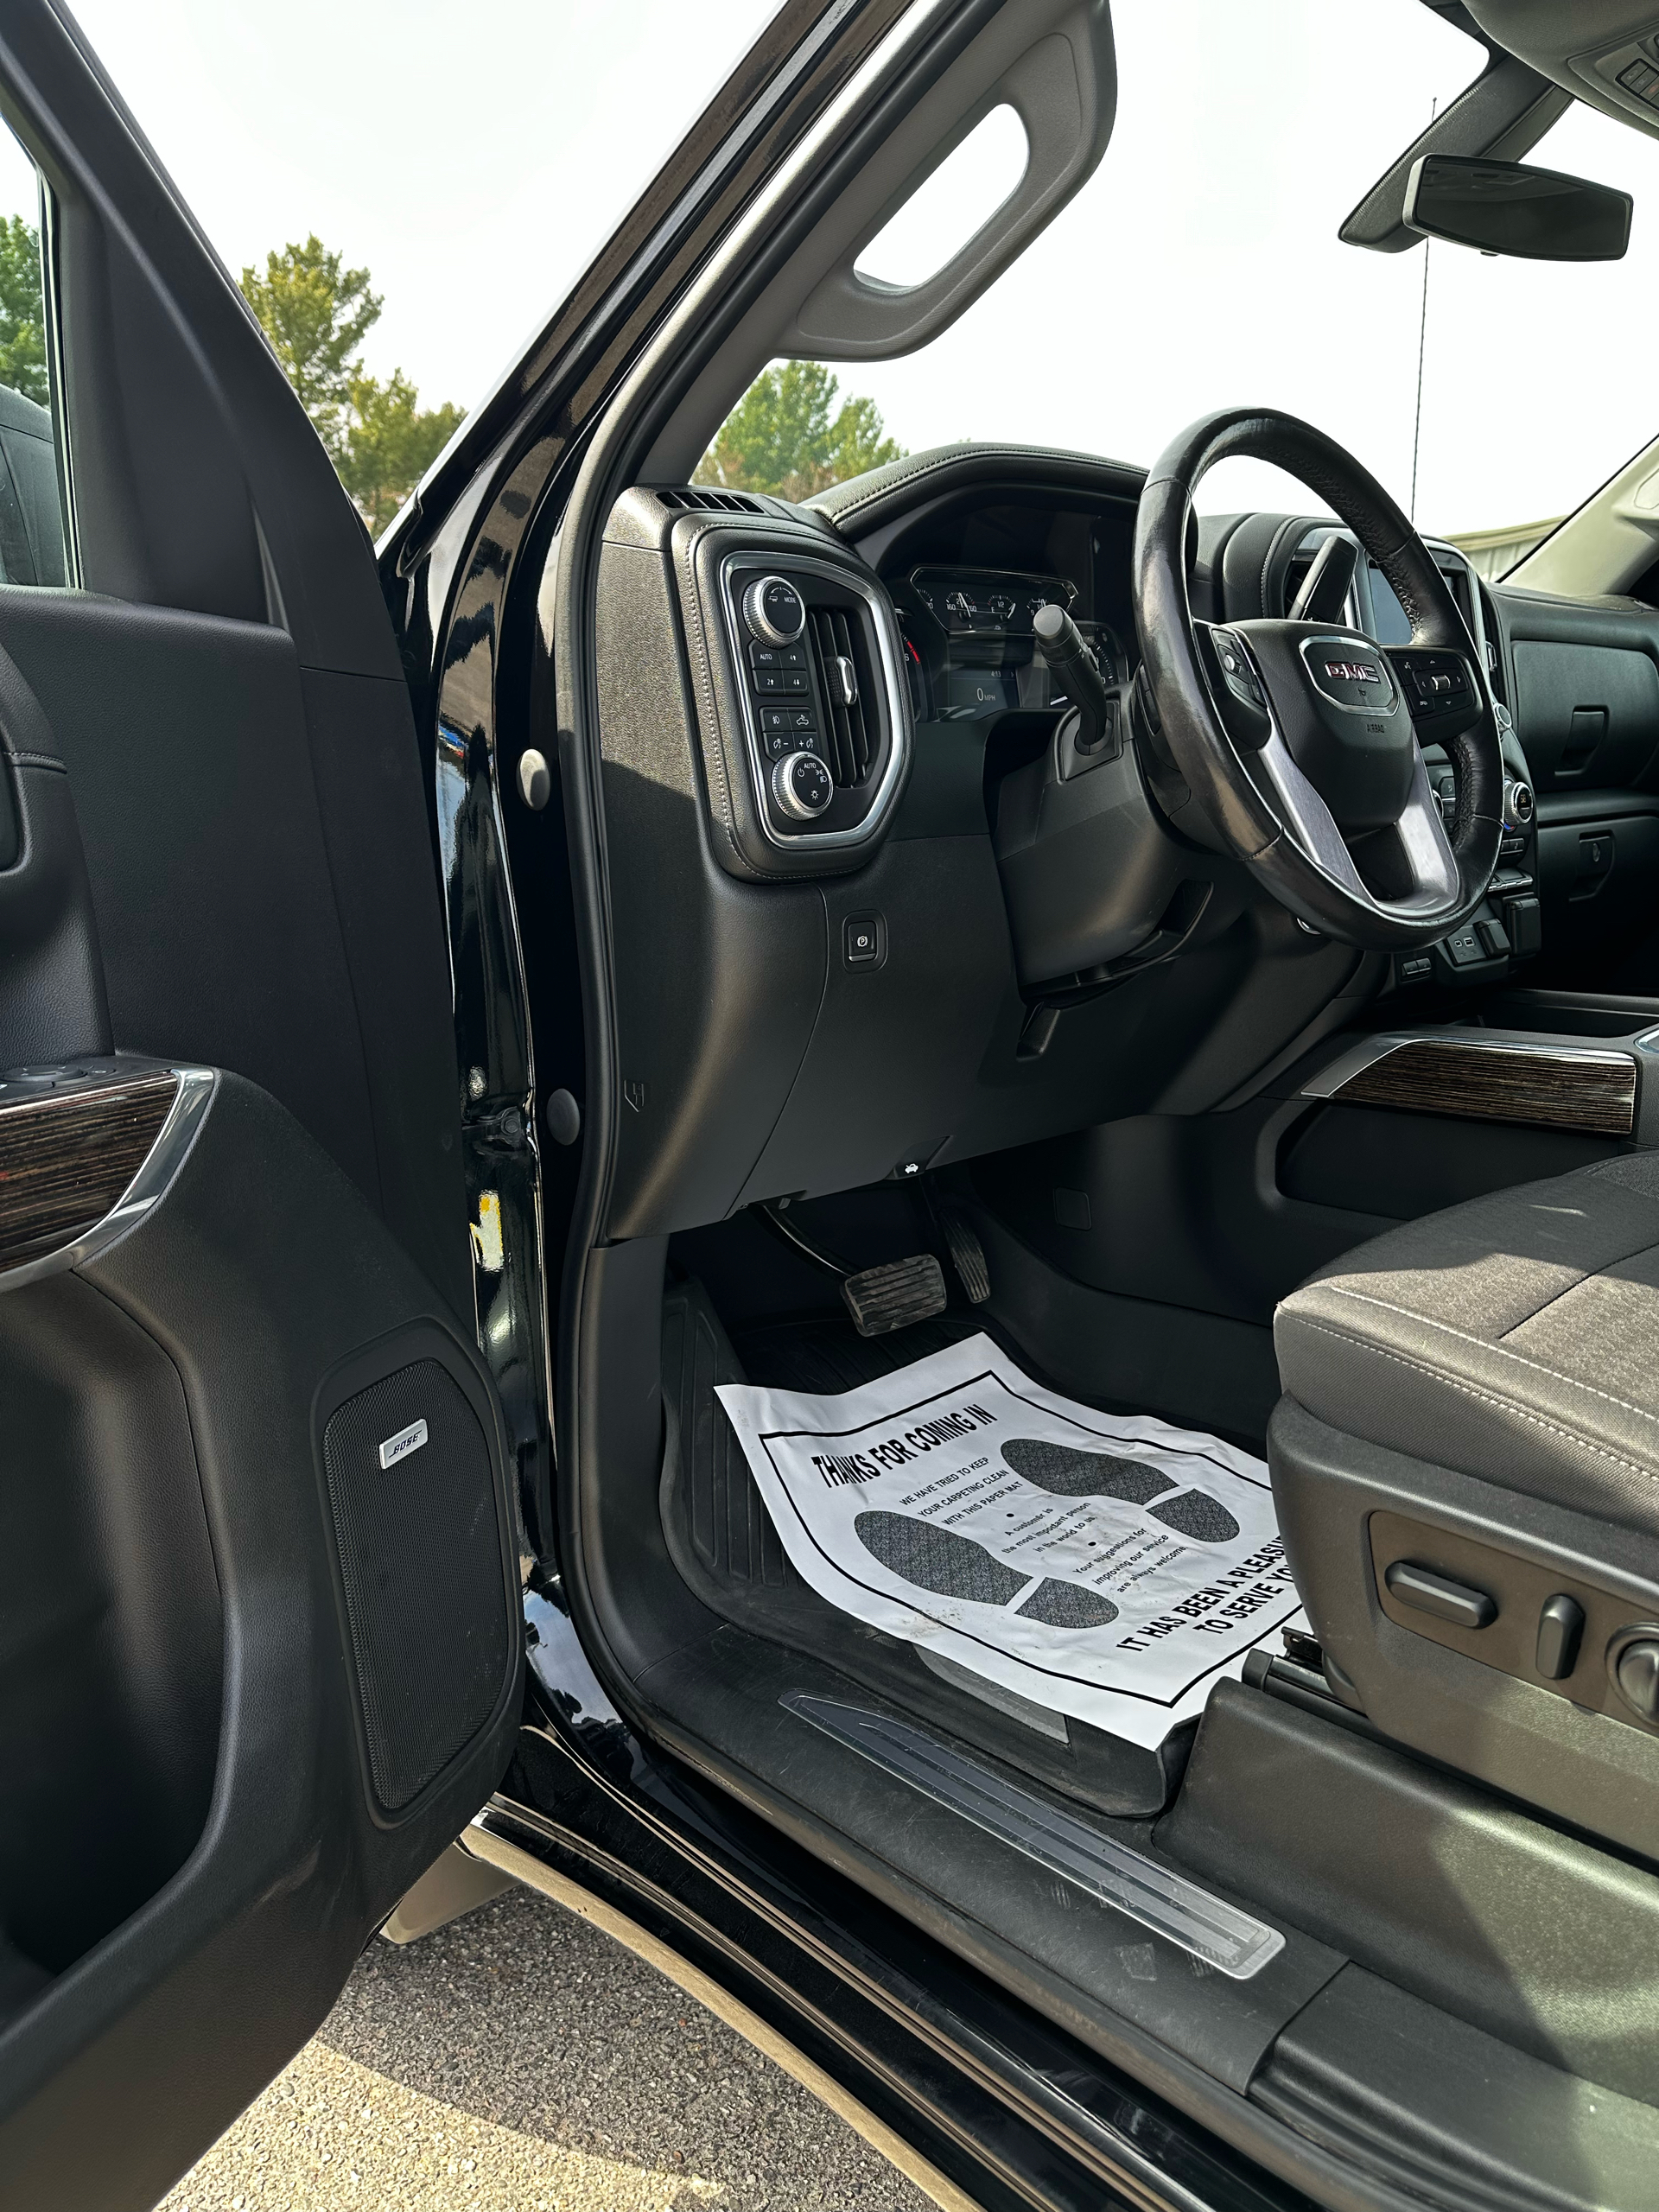 2020 Other SIERRA 1500 ELEVATION DOUBLE CAB in Gaylord, Michigan - Photo 12